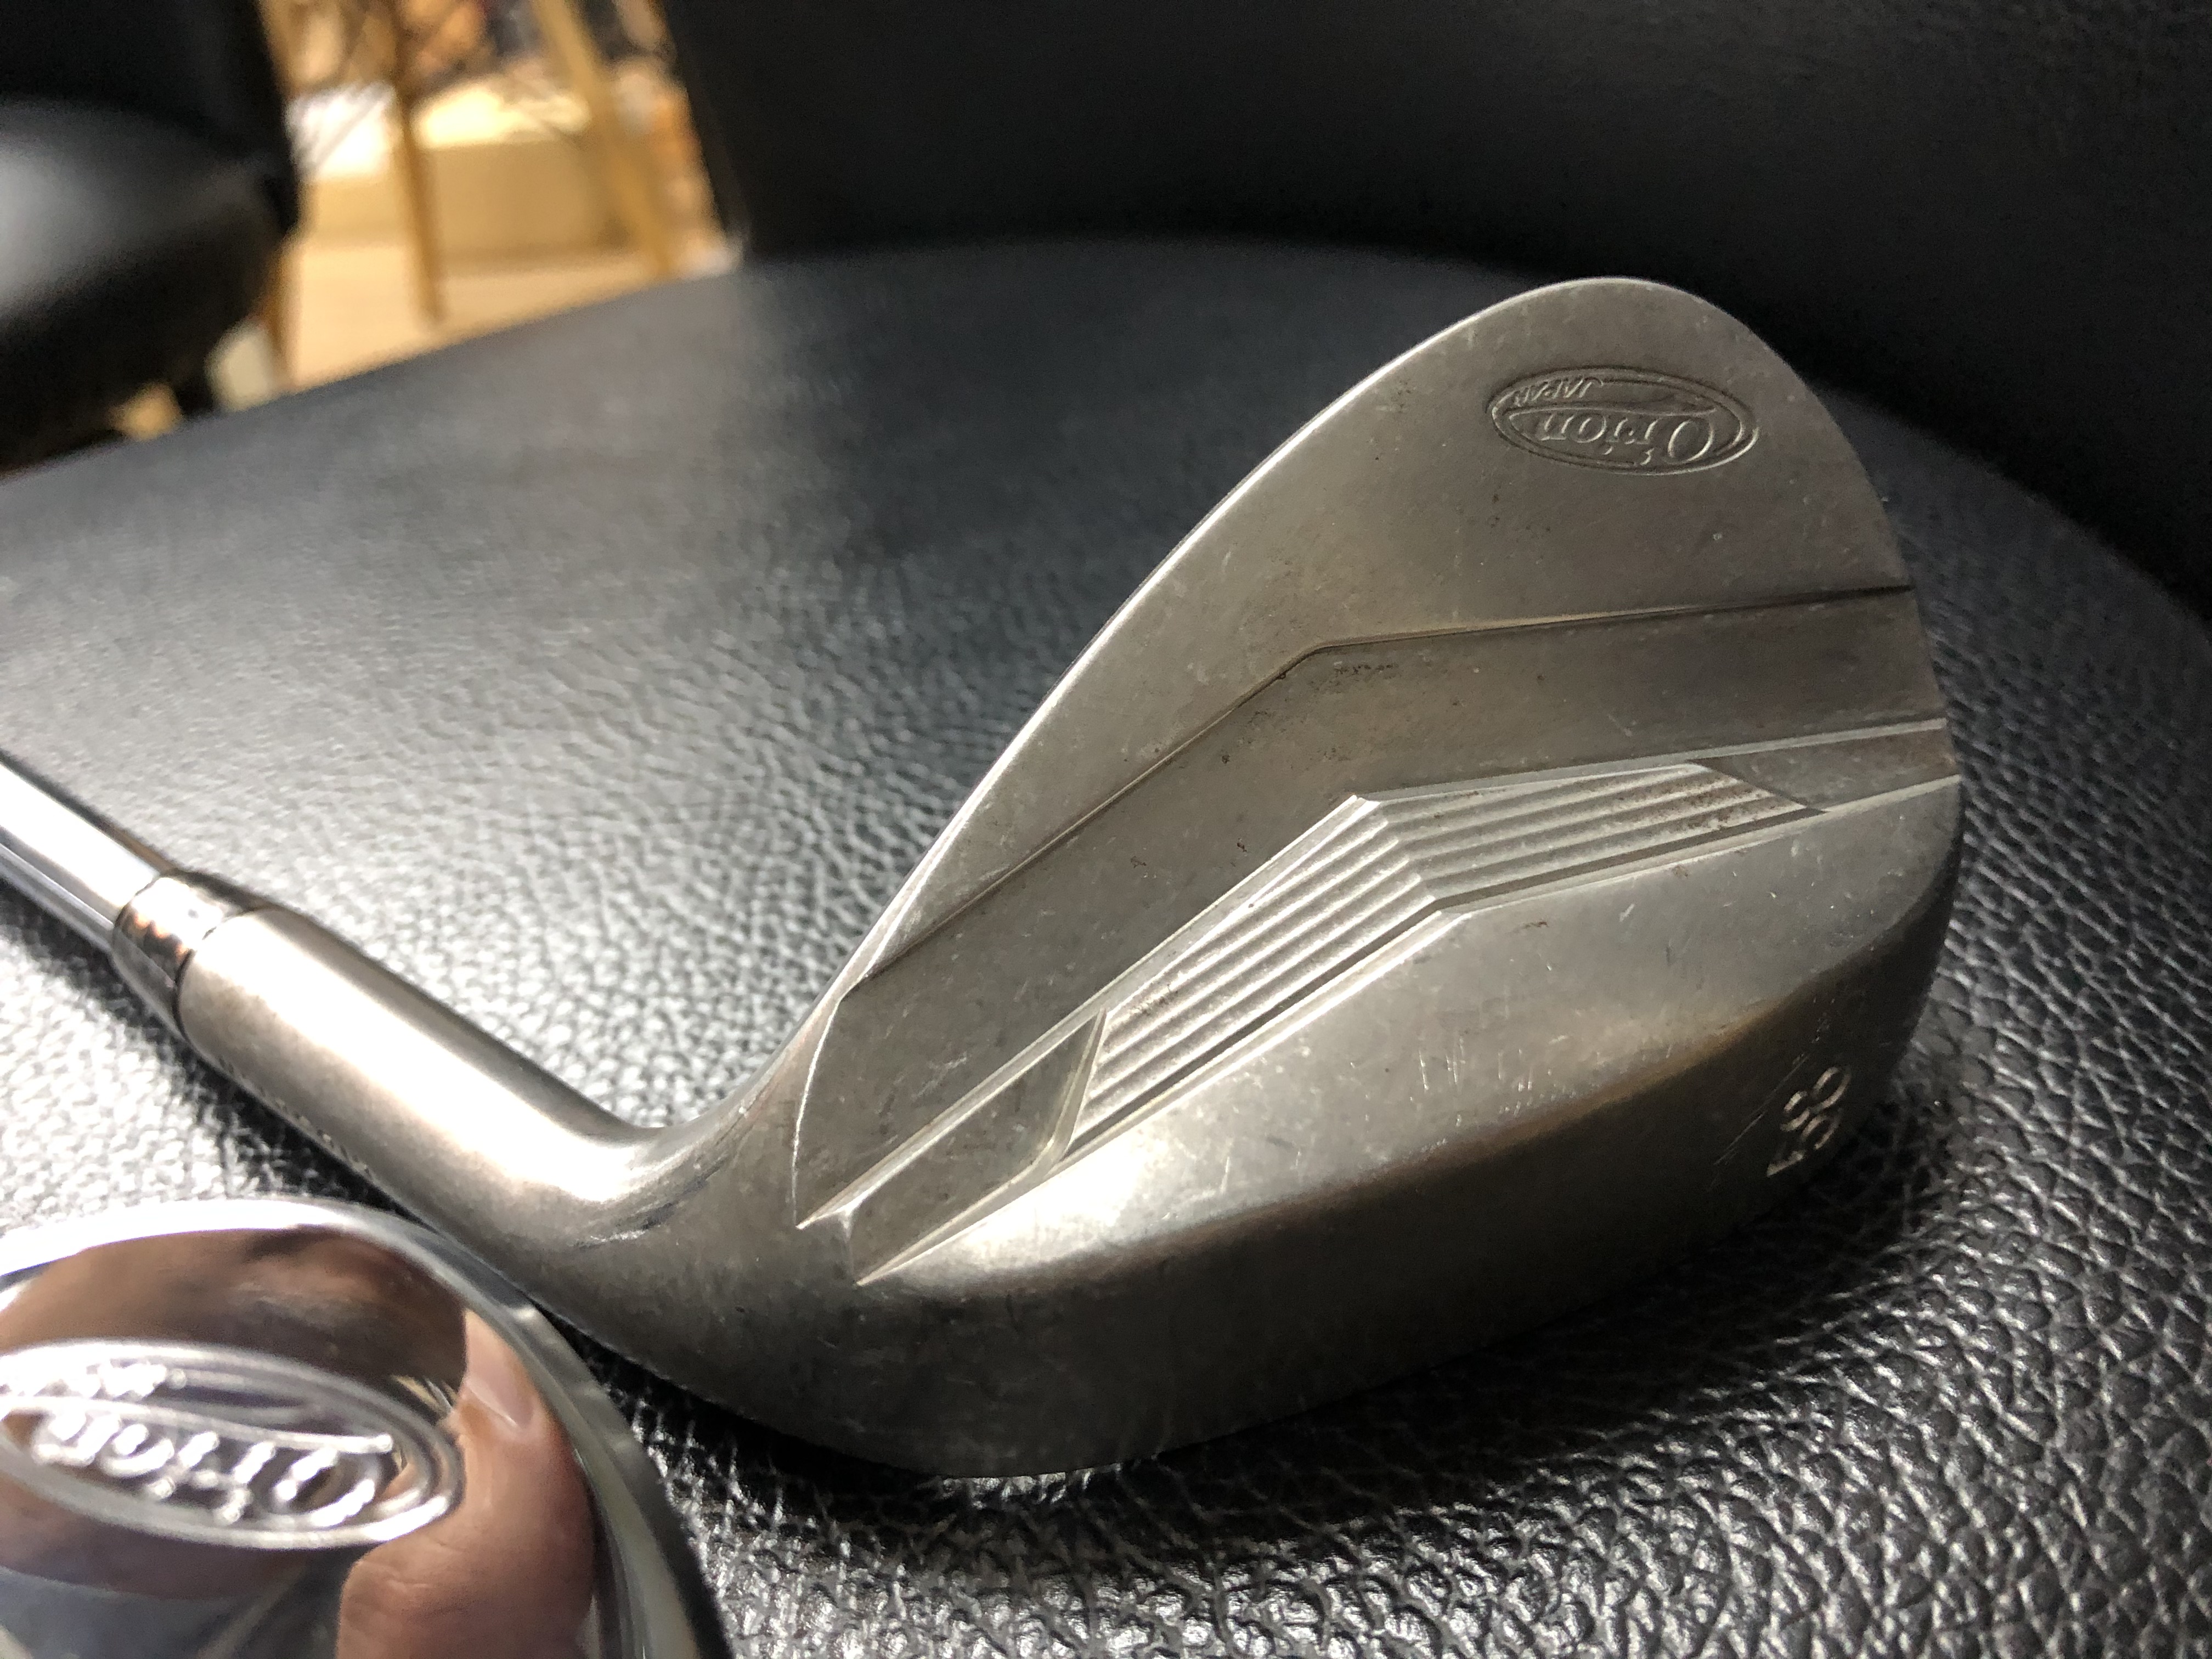 Orion Closer Wedge : CHOICE 店長の切磋琢磨なブログ